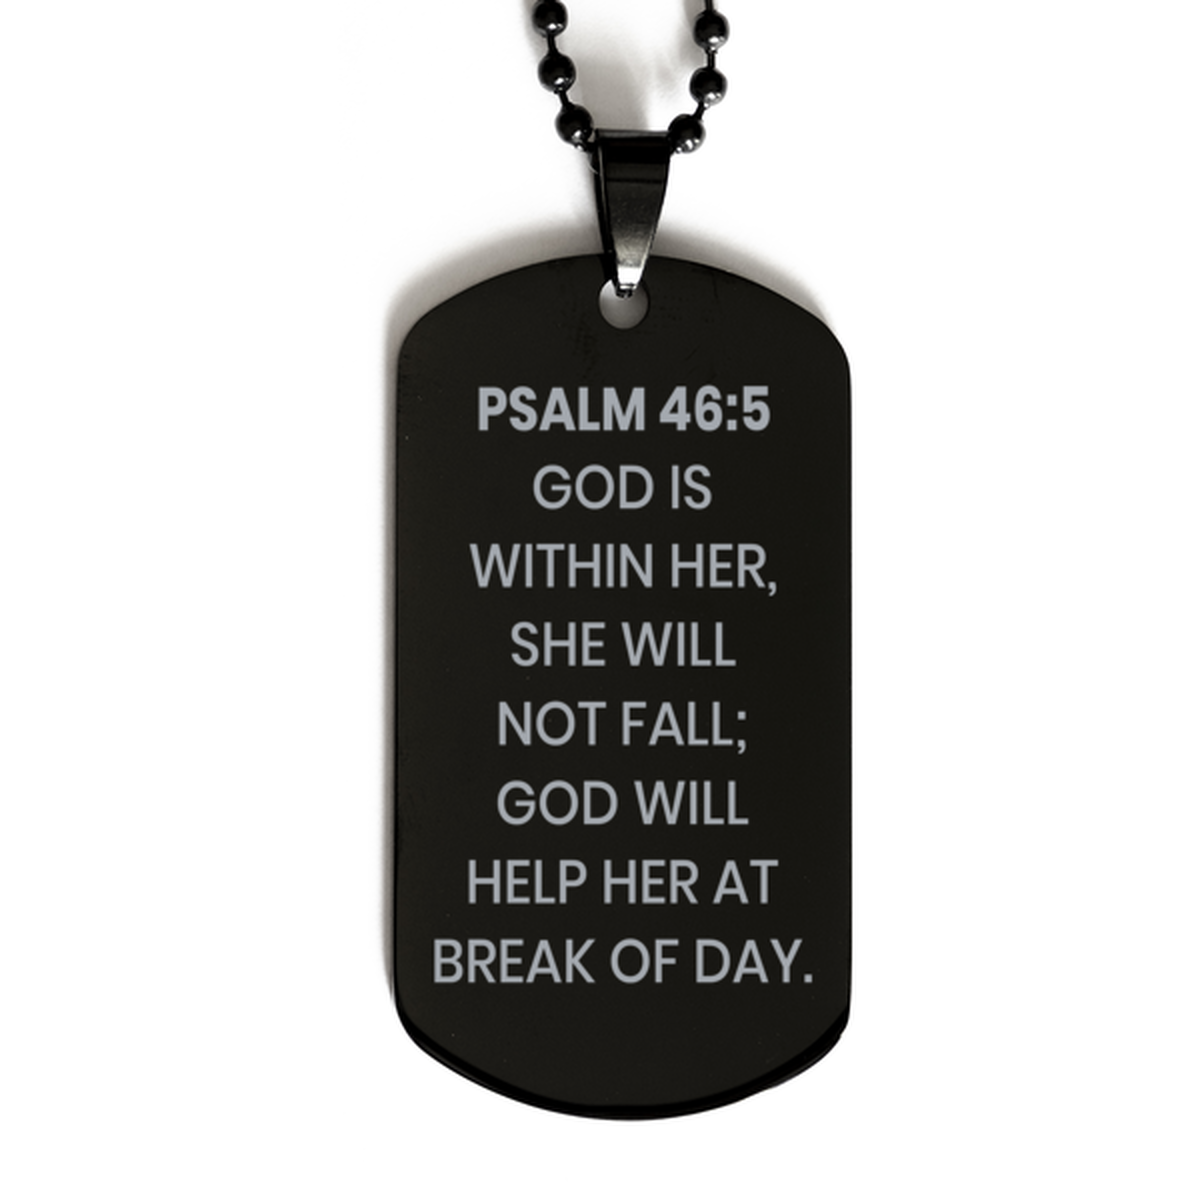 Psalm 46:5 Necklace, Bible Verse Necklace, Christian Necklace, Christian Birthday Gift, Black Dog Tag Necklace, Gift for Christian.